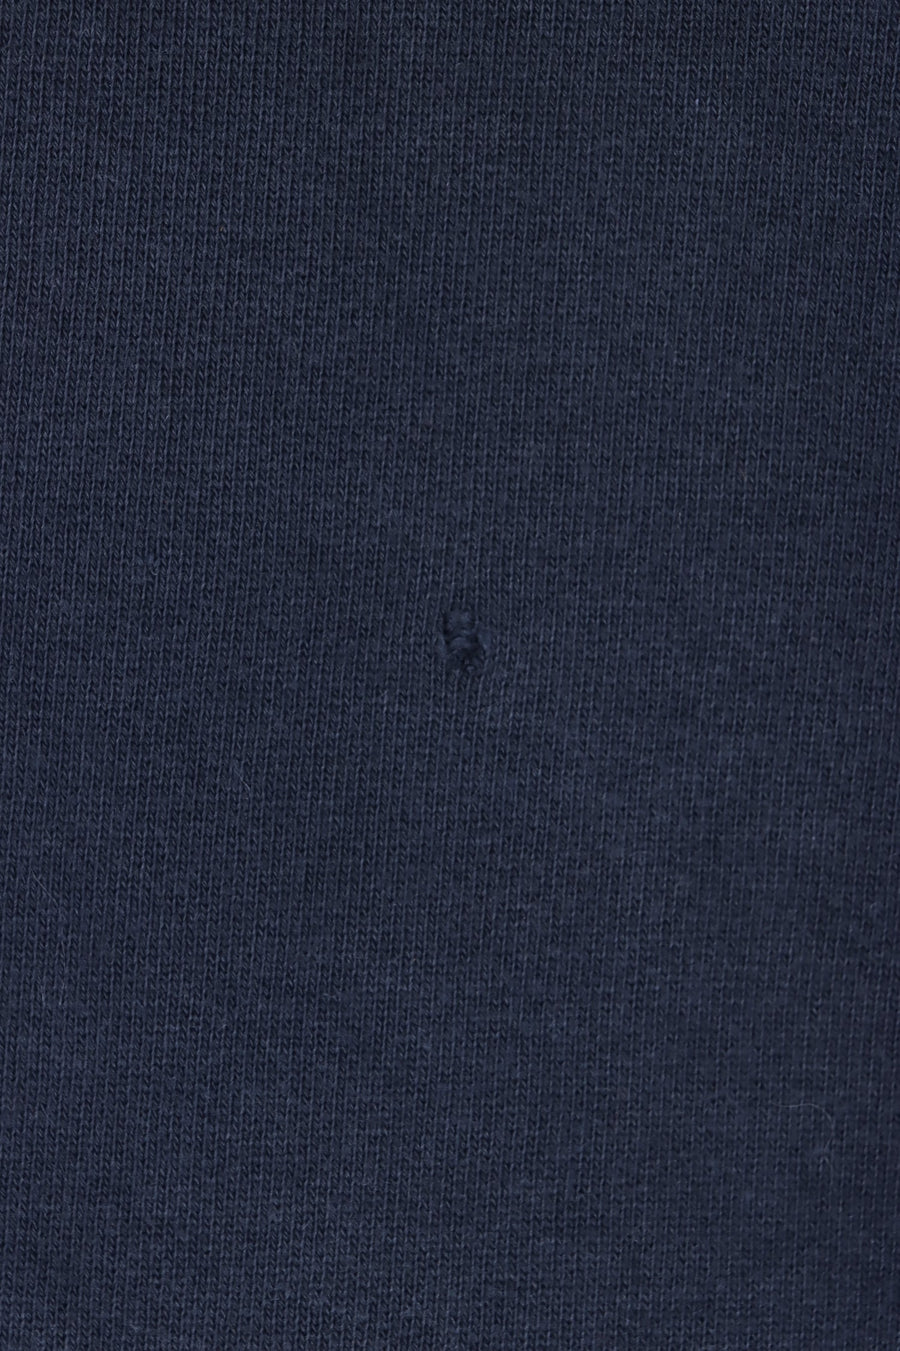 THE NORTH FACE Navy Blue Embroidered Big Logo Hoodie (L)